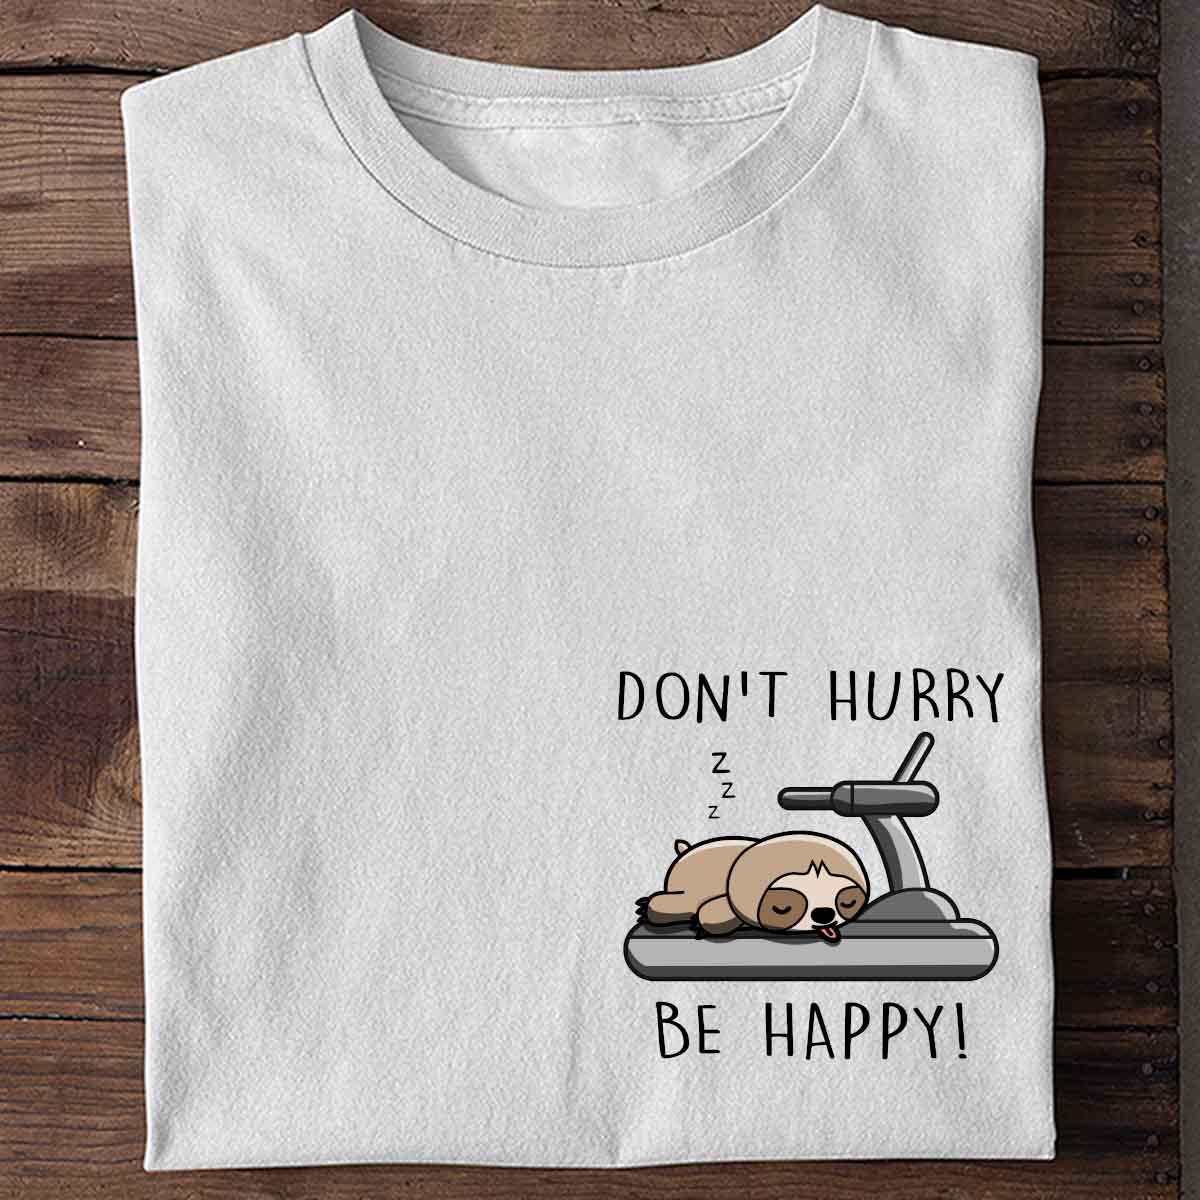 Don't Hurry Sloth - Shirt Unisex Chest